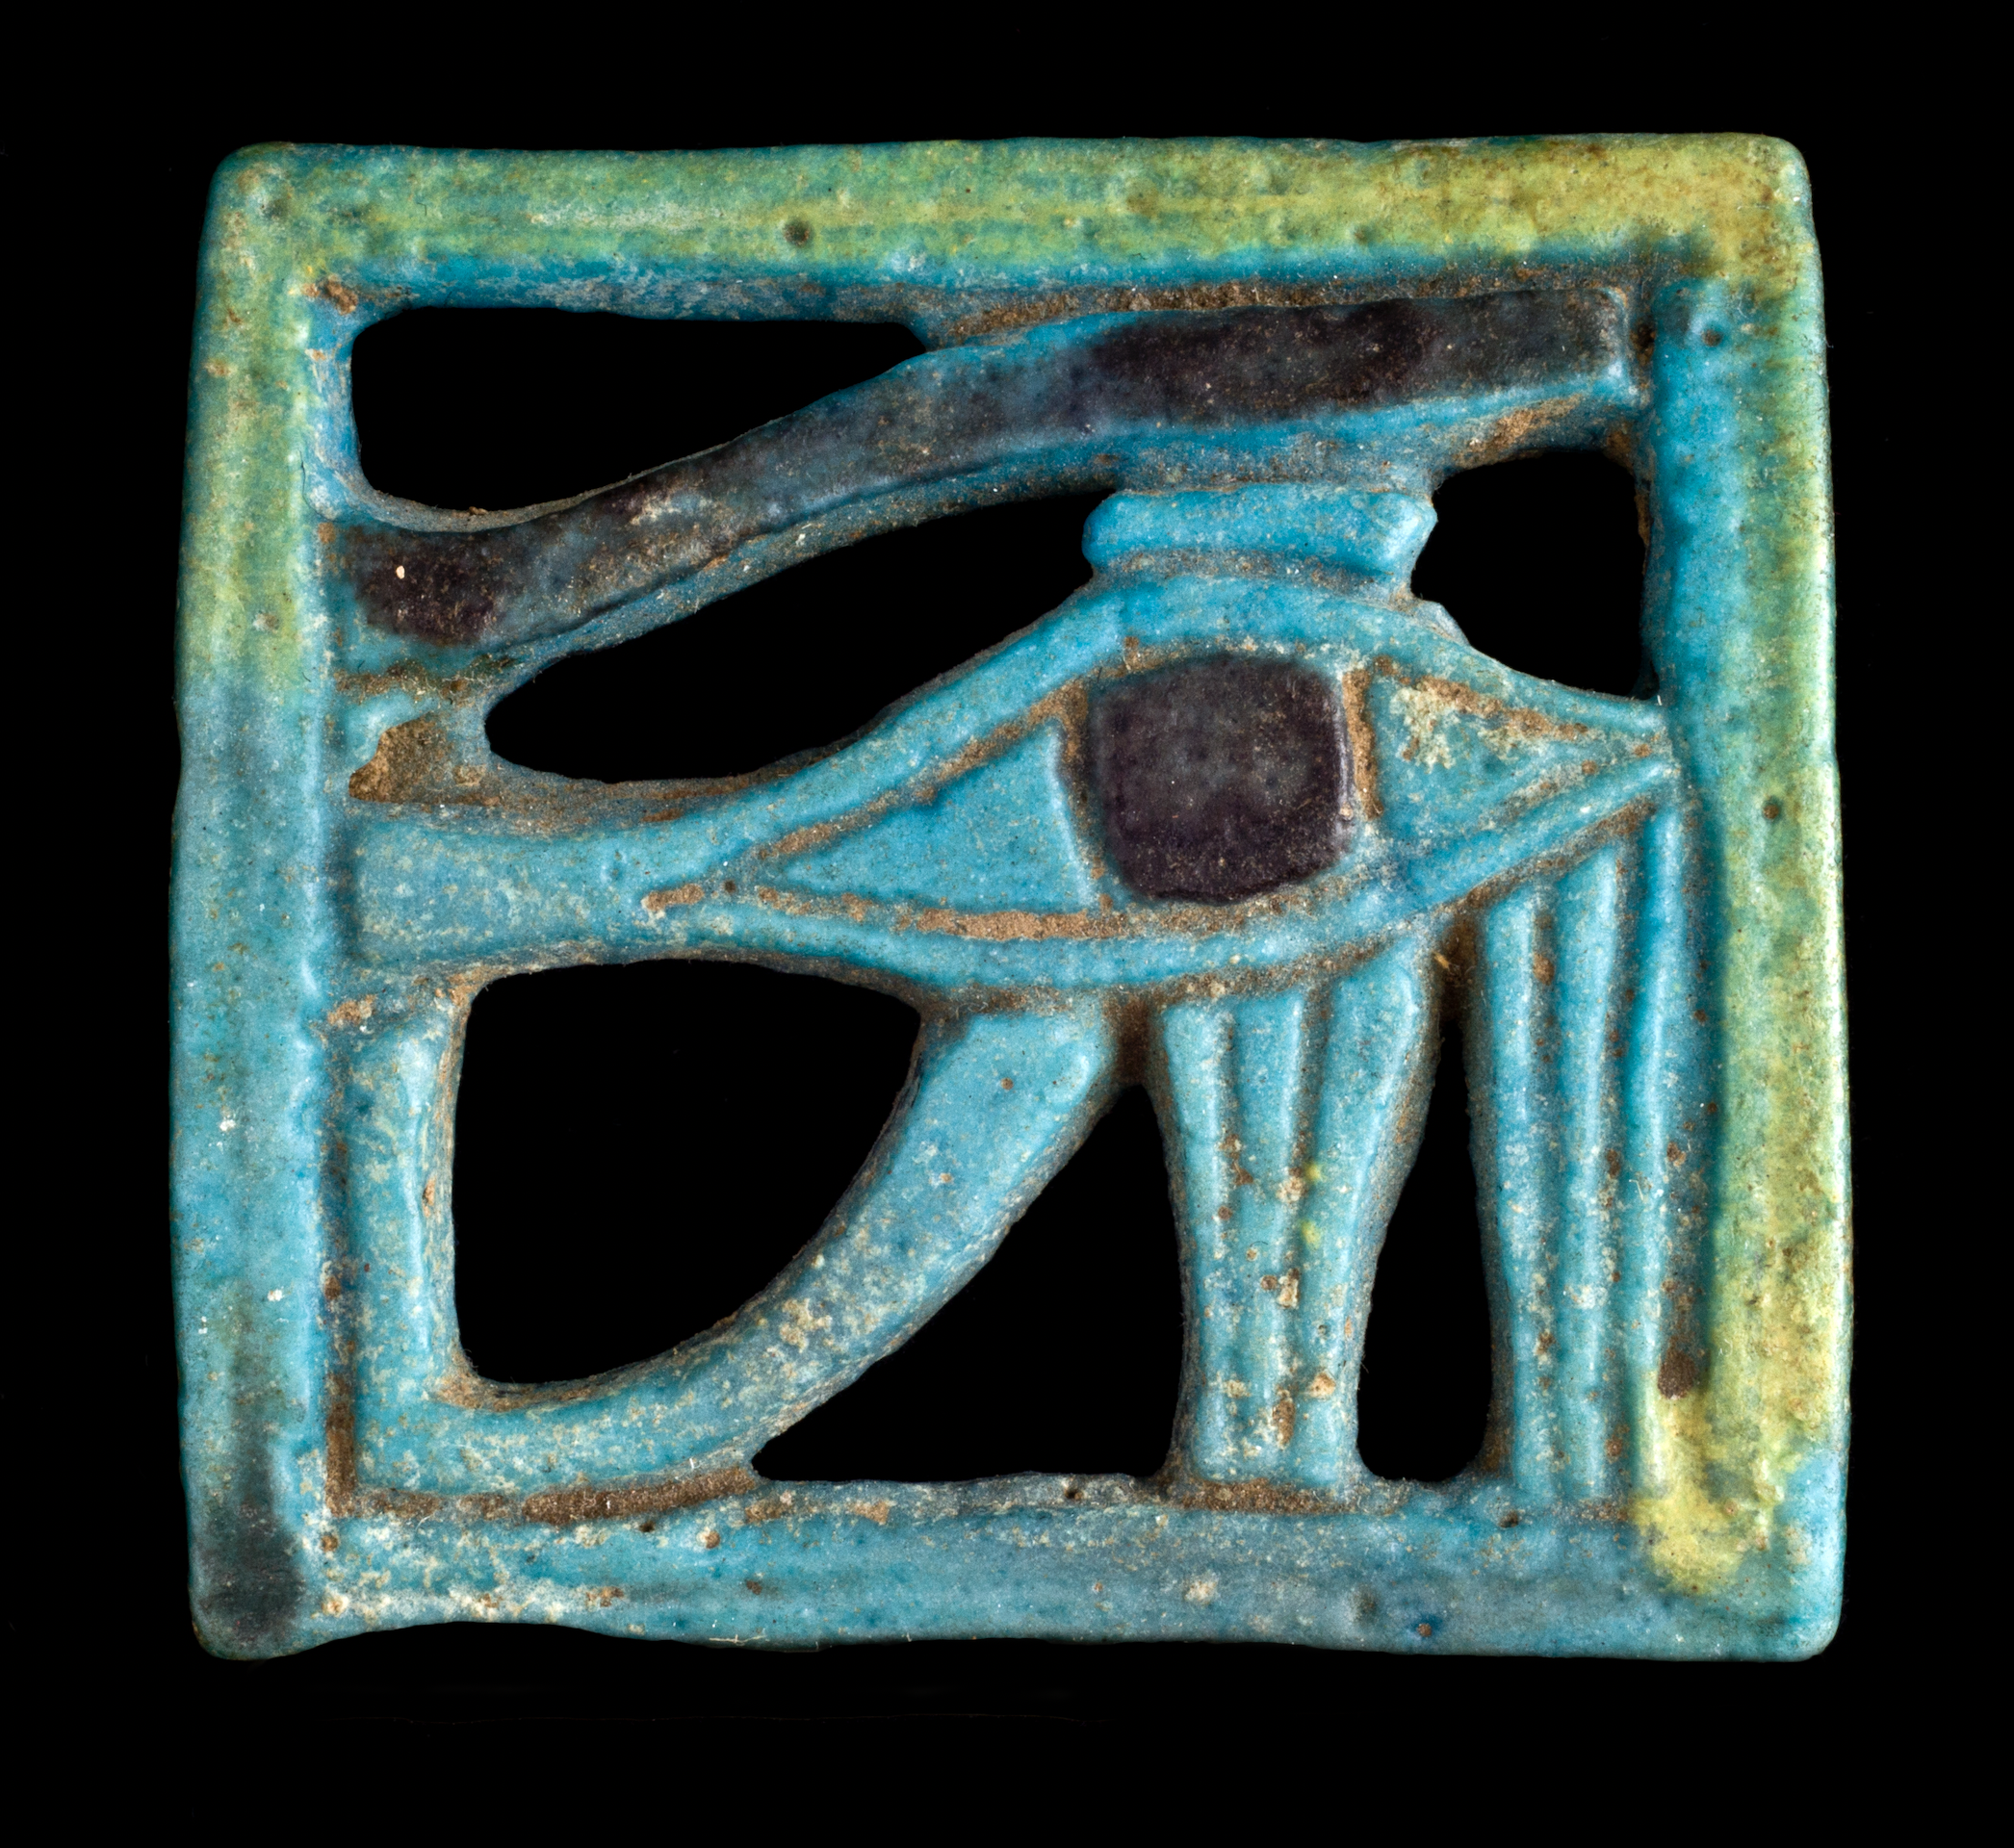 Openwork wedjat eye, ancient Egyptian, Third Intermediate Period, about 1076–655 B.C., polychrome faience. Mrs. Kingsmill Marrs Collection, Worcester Art Museum, 1925.675 